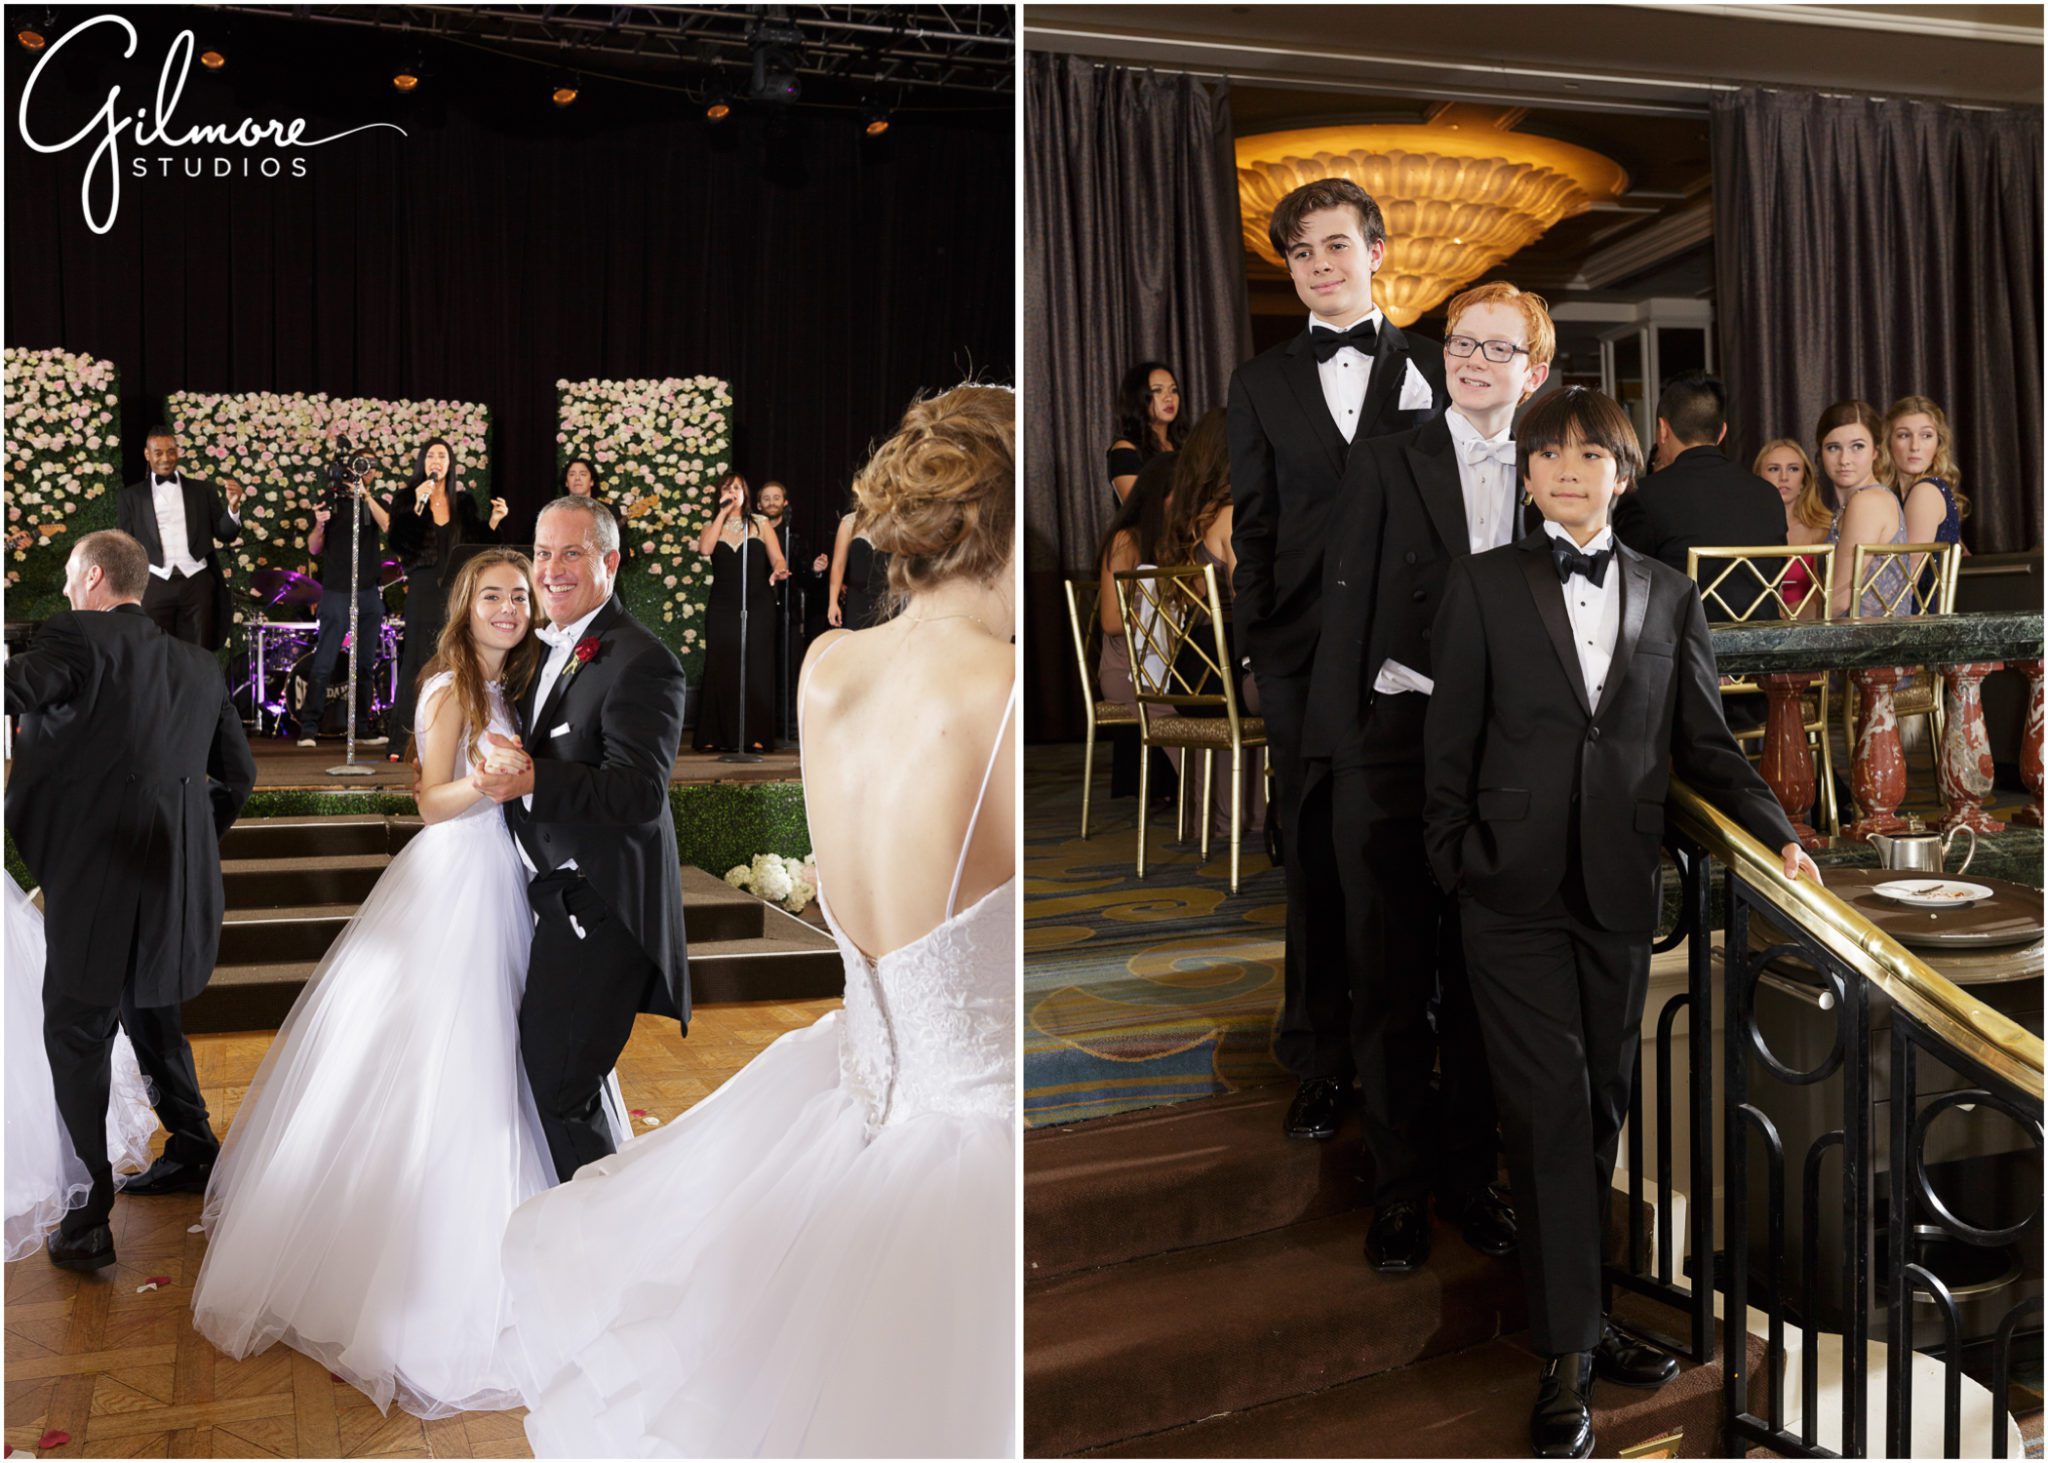 dancing, little brothers, debutante ball, escort, Beverly Hills event photography